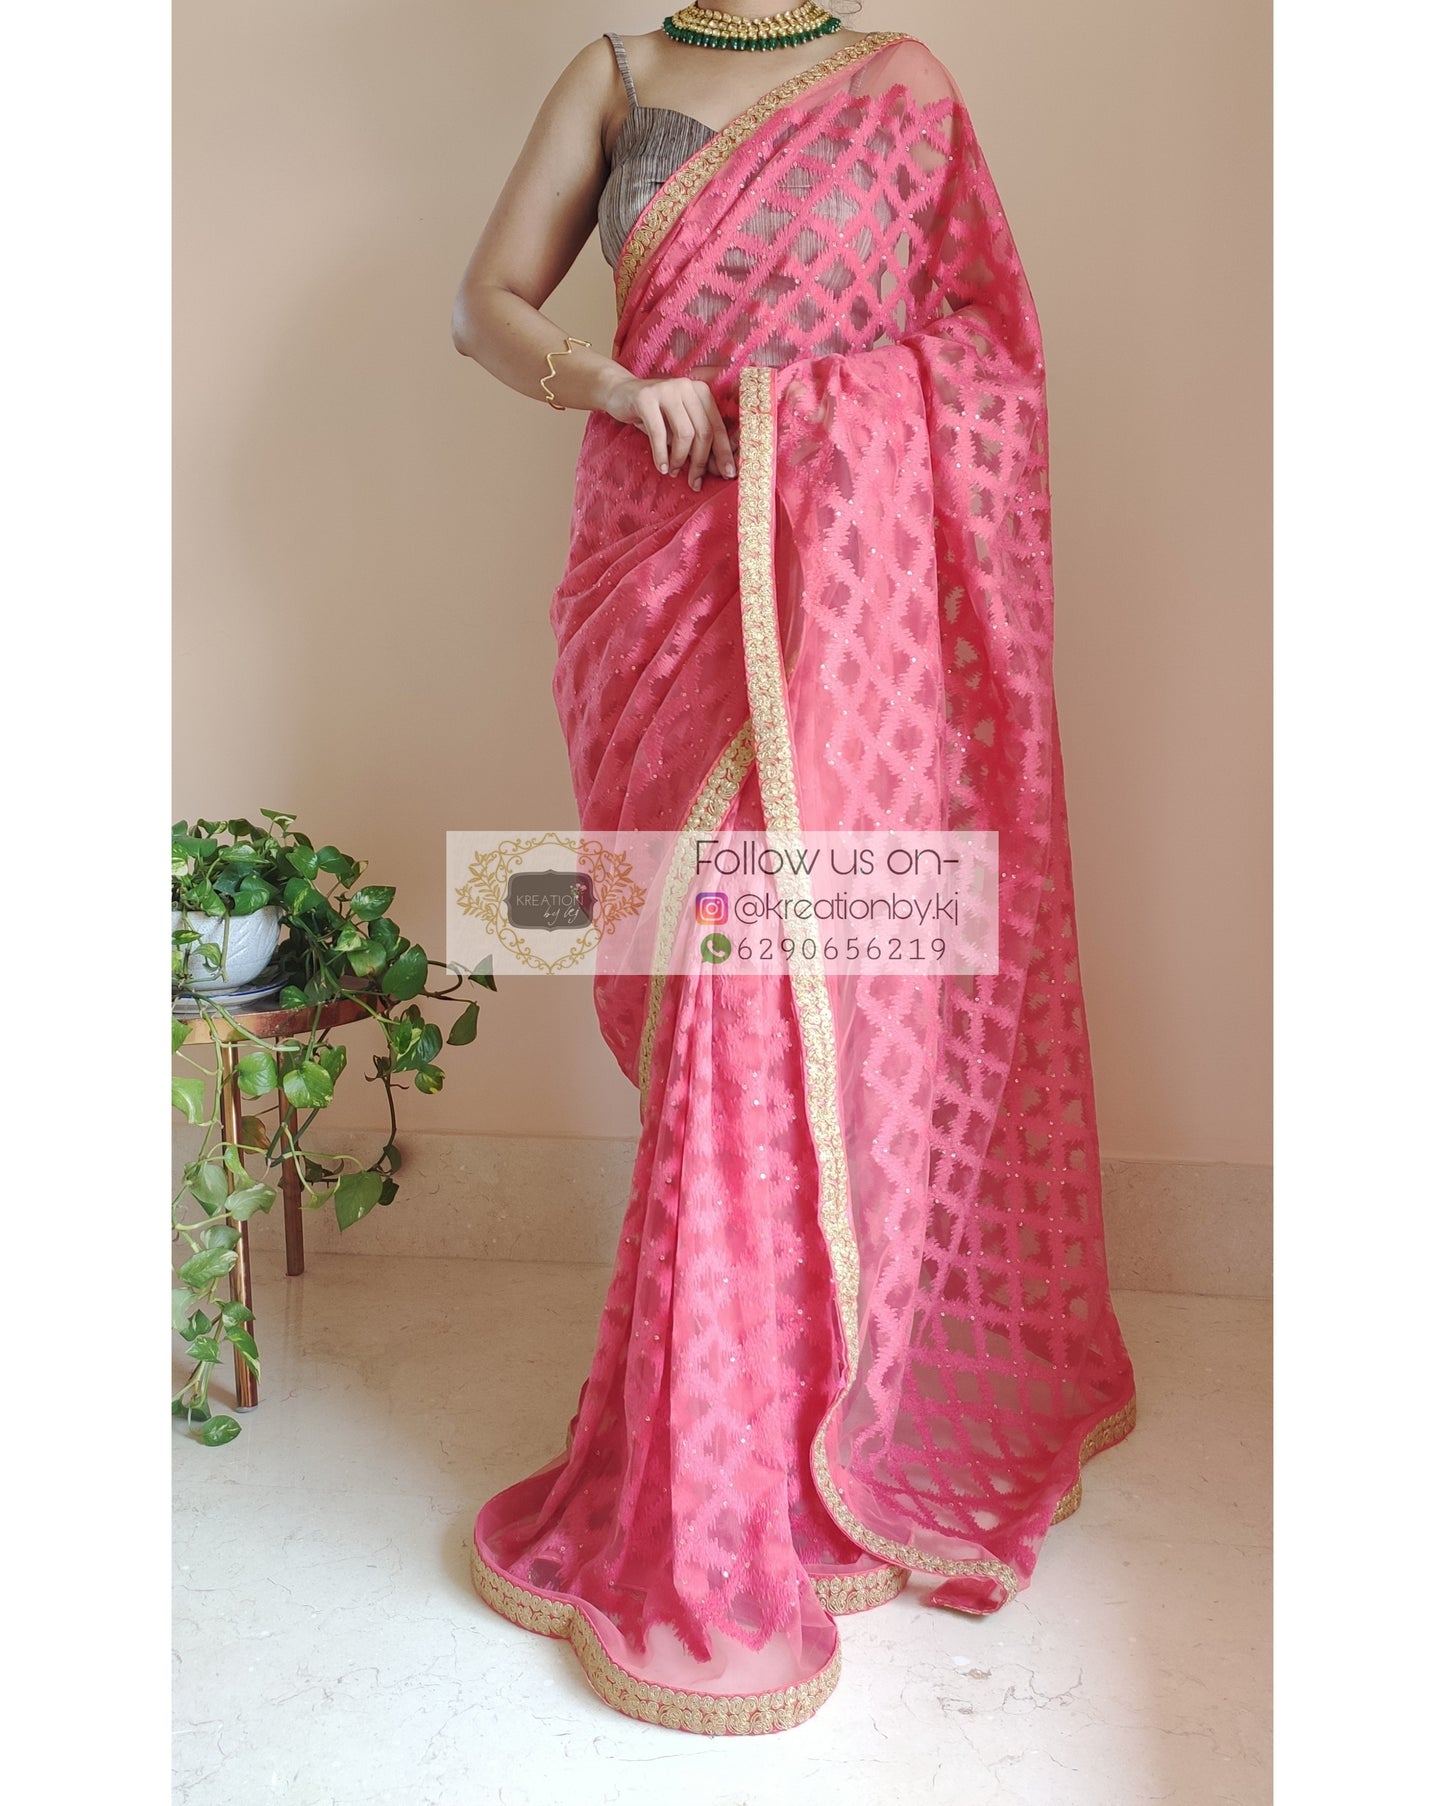 Coral Net Embroidered Saree With Zari Lace Border - kreationbykj